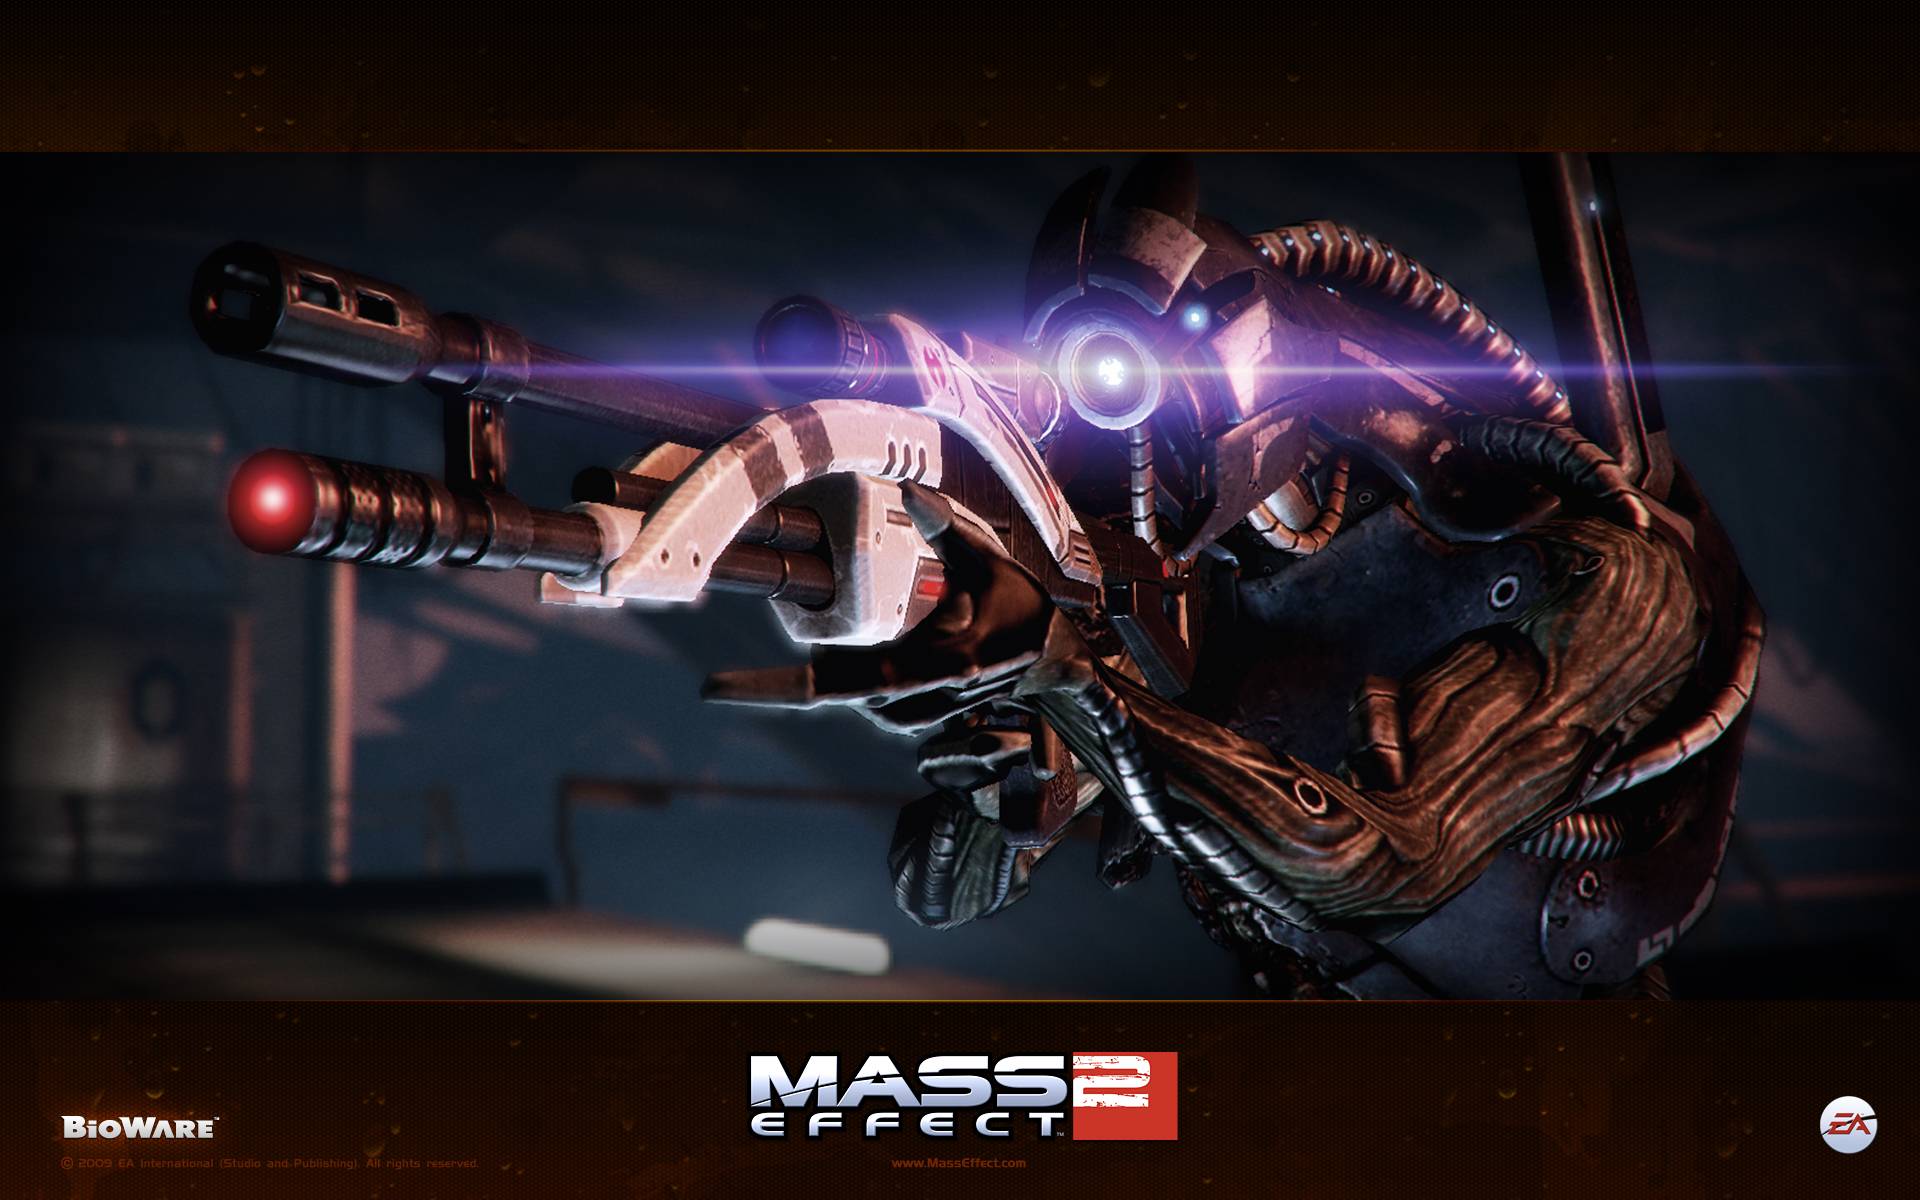 Check Below For Mass Effect Ps3 Wallpaper In 1080p HD And 720p